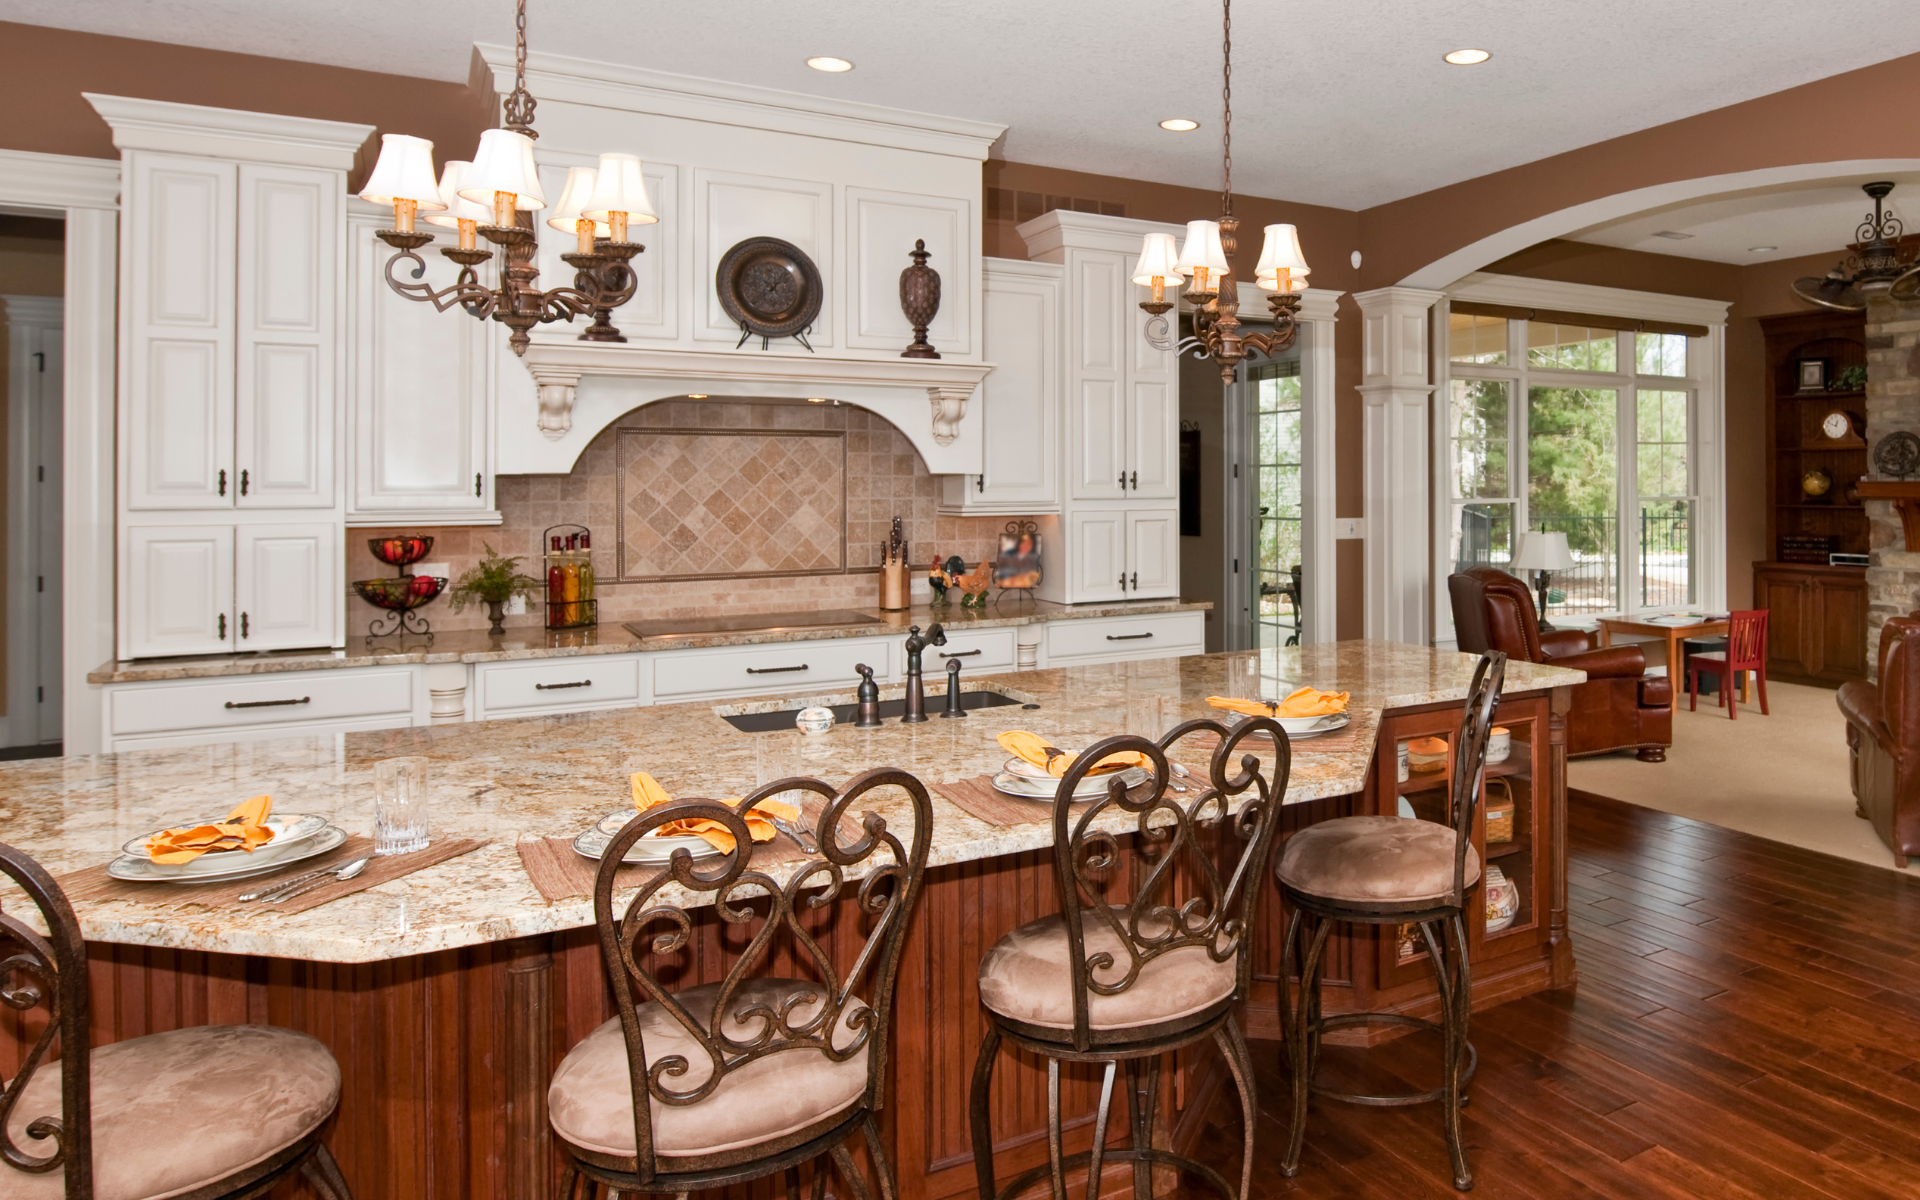 Traditional style kitchen with white cabinets with crown moldings